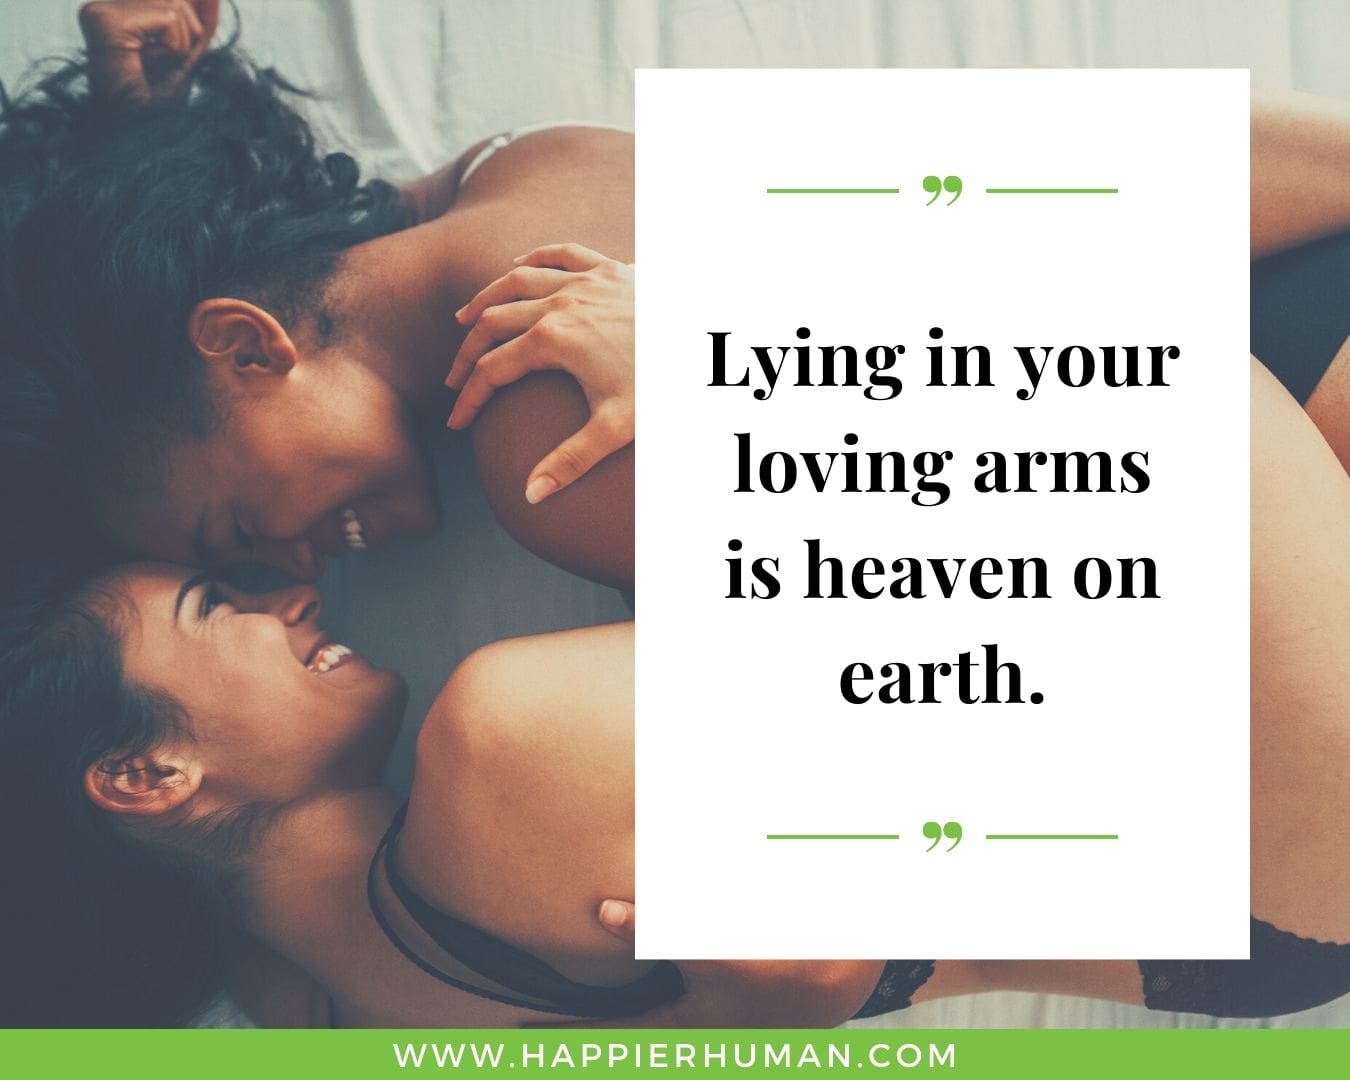 Short, Deep Love Quotes for Her - “Lying in your loving arms is heaven on earth.”